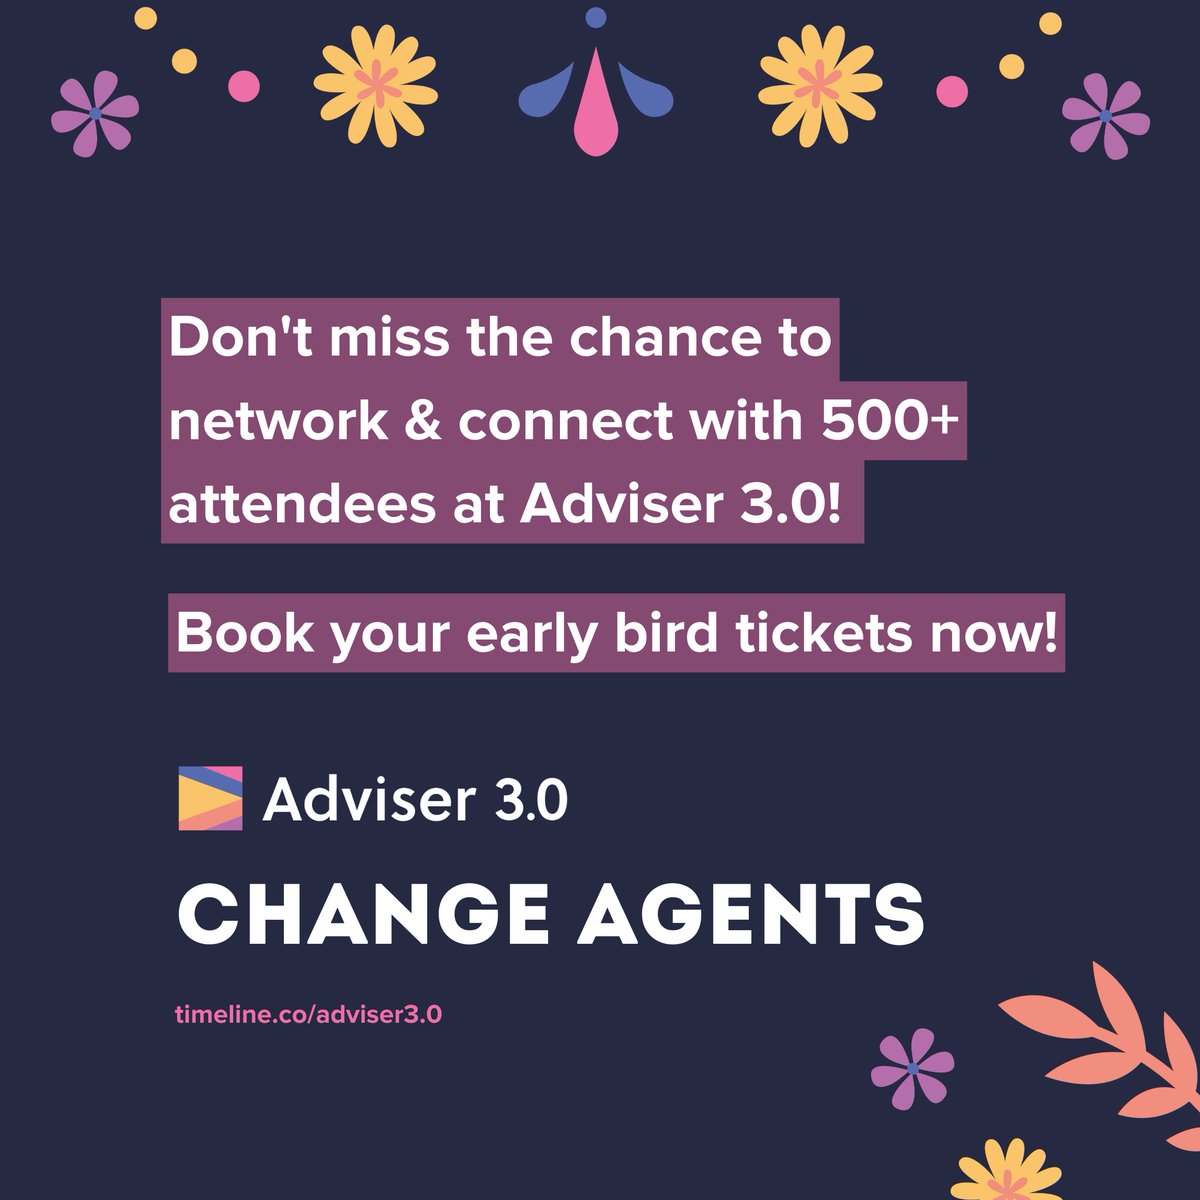 Tomorrow is the last day to get your Early Bird Ticket for Adviser 3.0! 

Set to be (potentially) the best adviser event of 2023...you don't want to miss out on this! 👀😜 

Book your ticket here 👉 bit.ly/3m5NwL6

#adviser3point0 #changeagents #earlybirdoffer